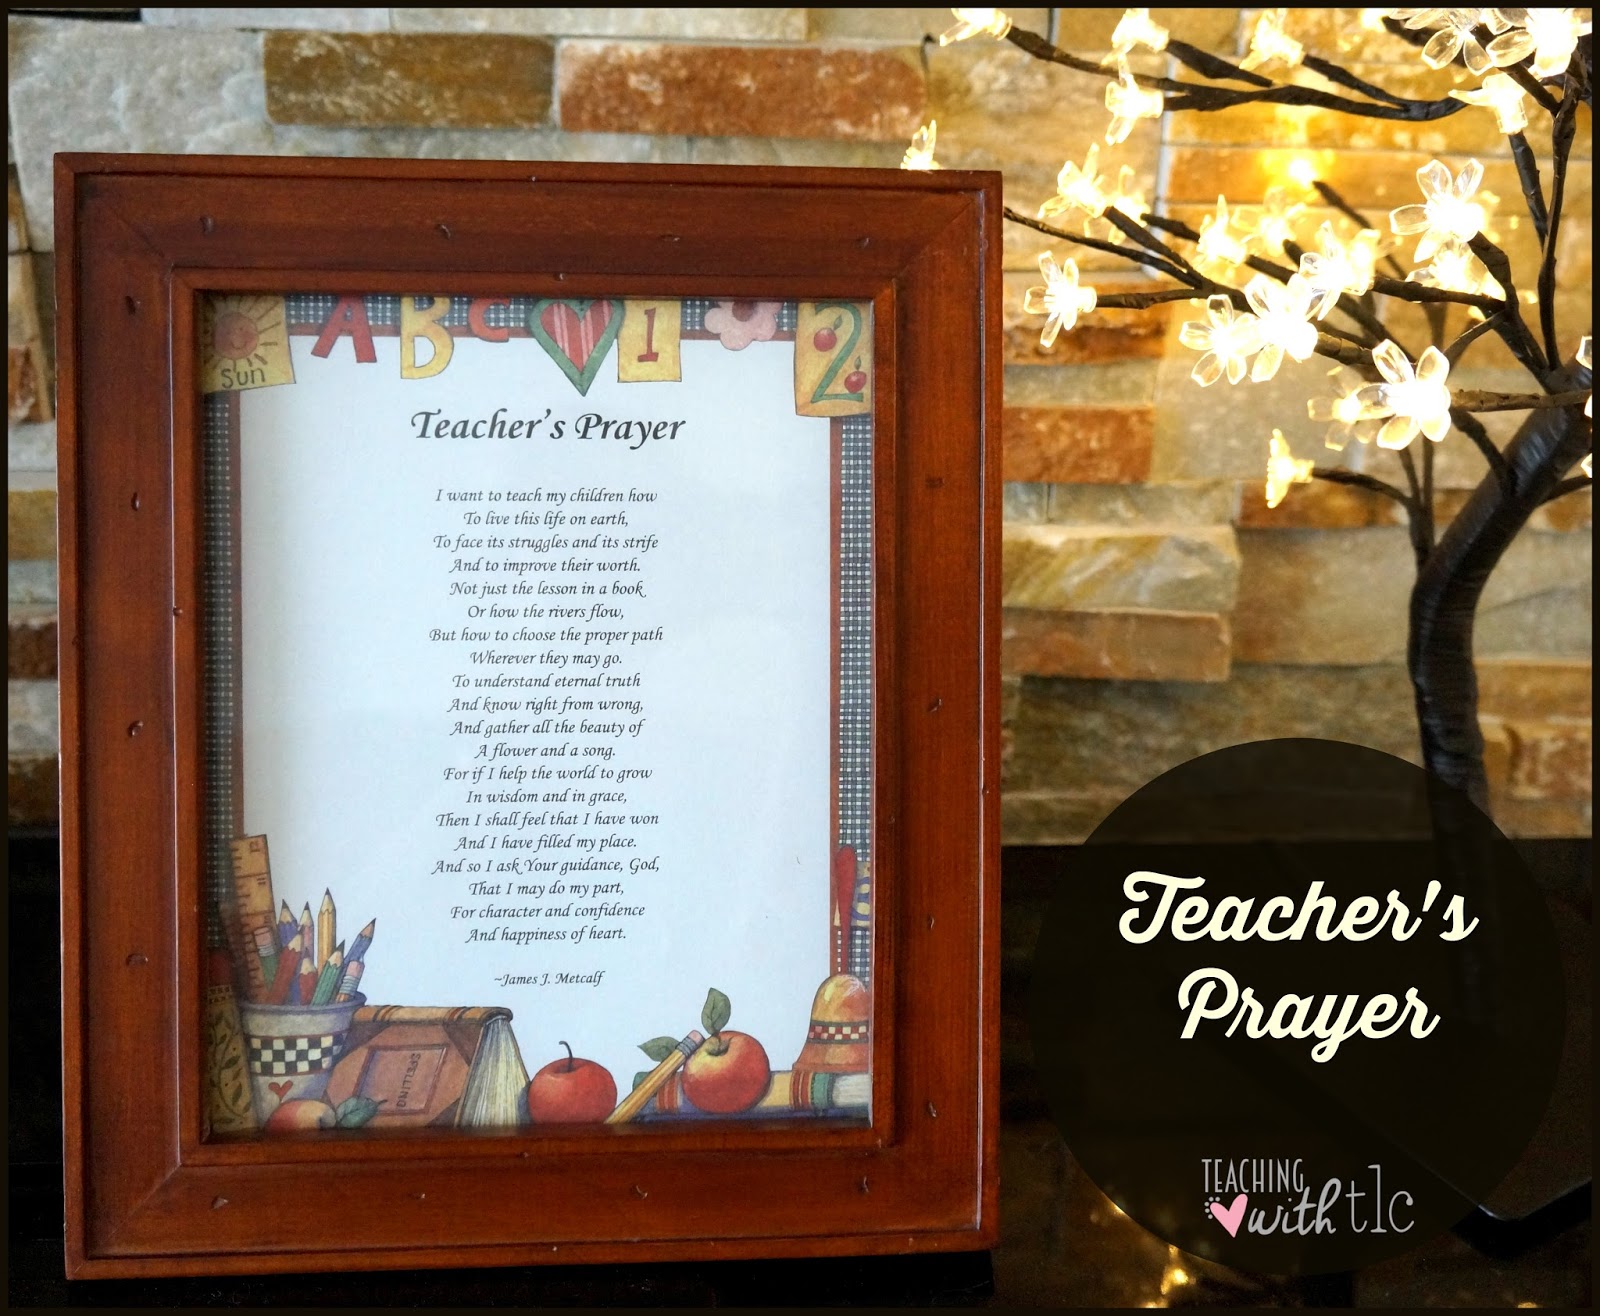 teaching-with-tlc-a-teacher-s-prayer-for-every-parent-and-educator